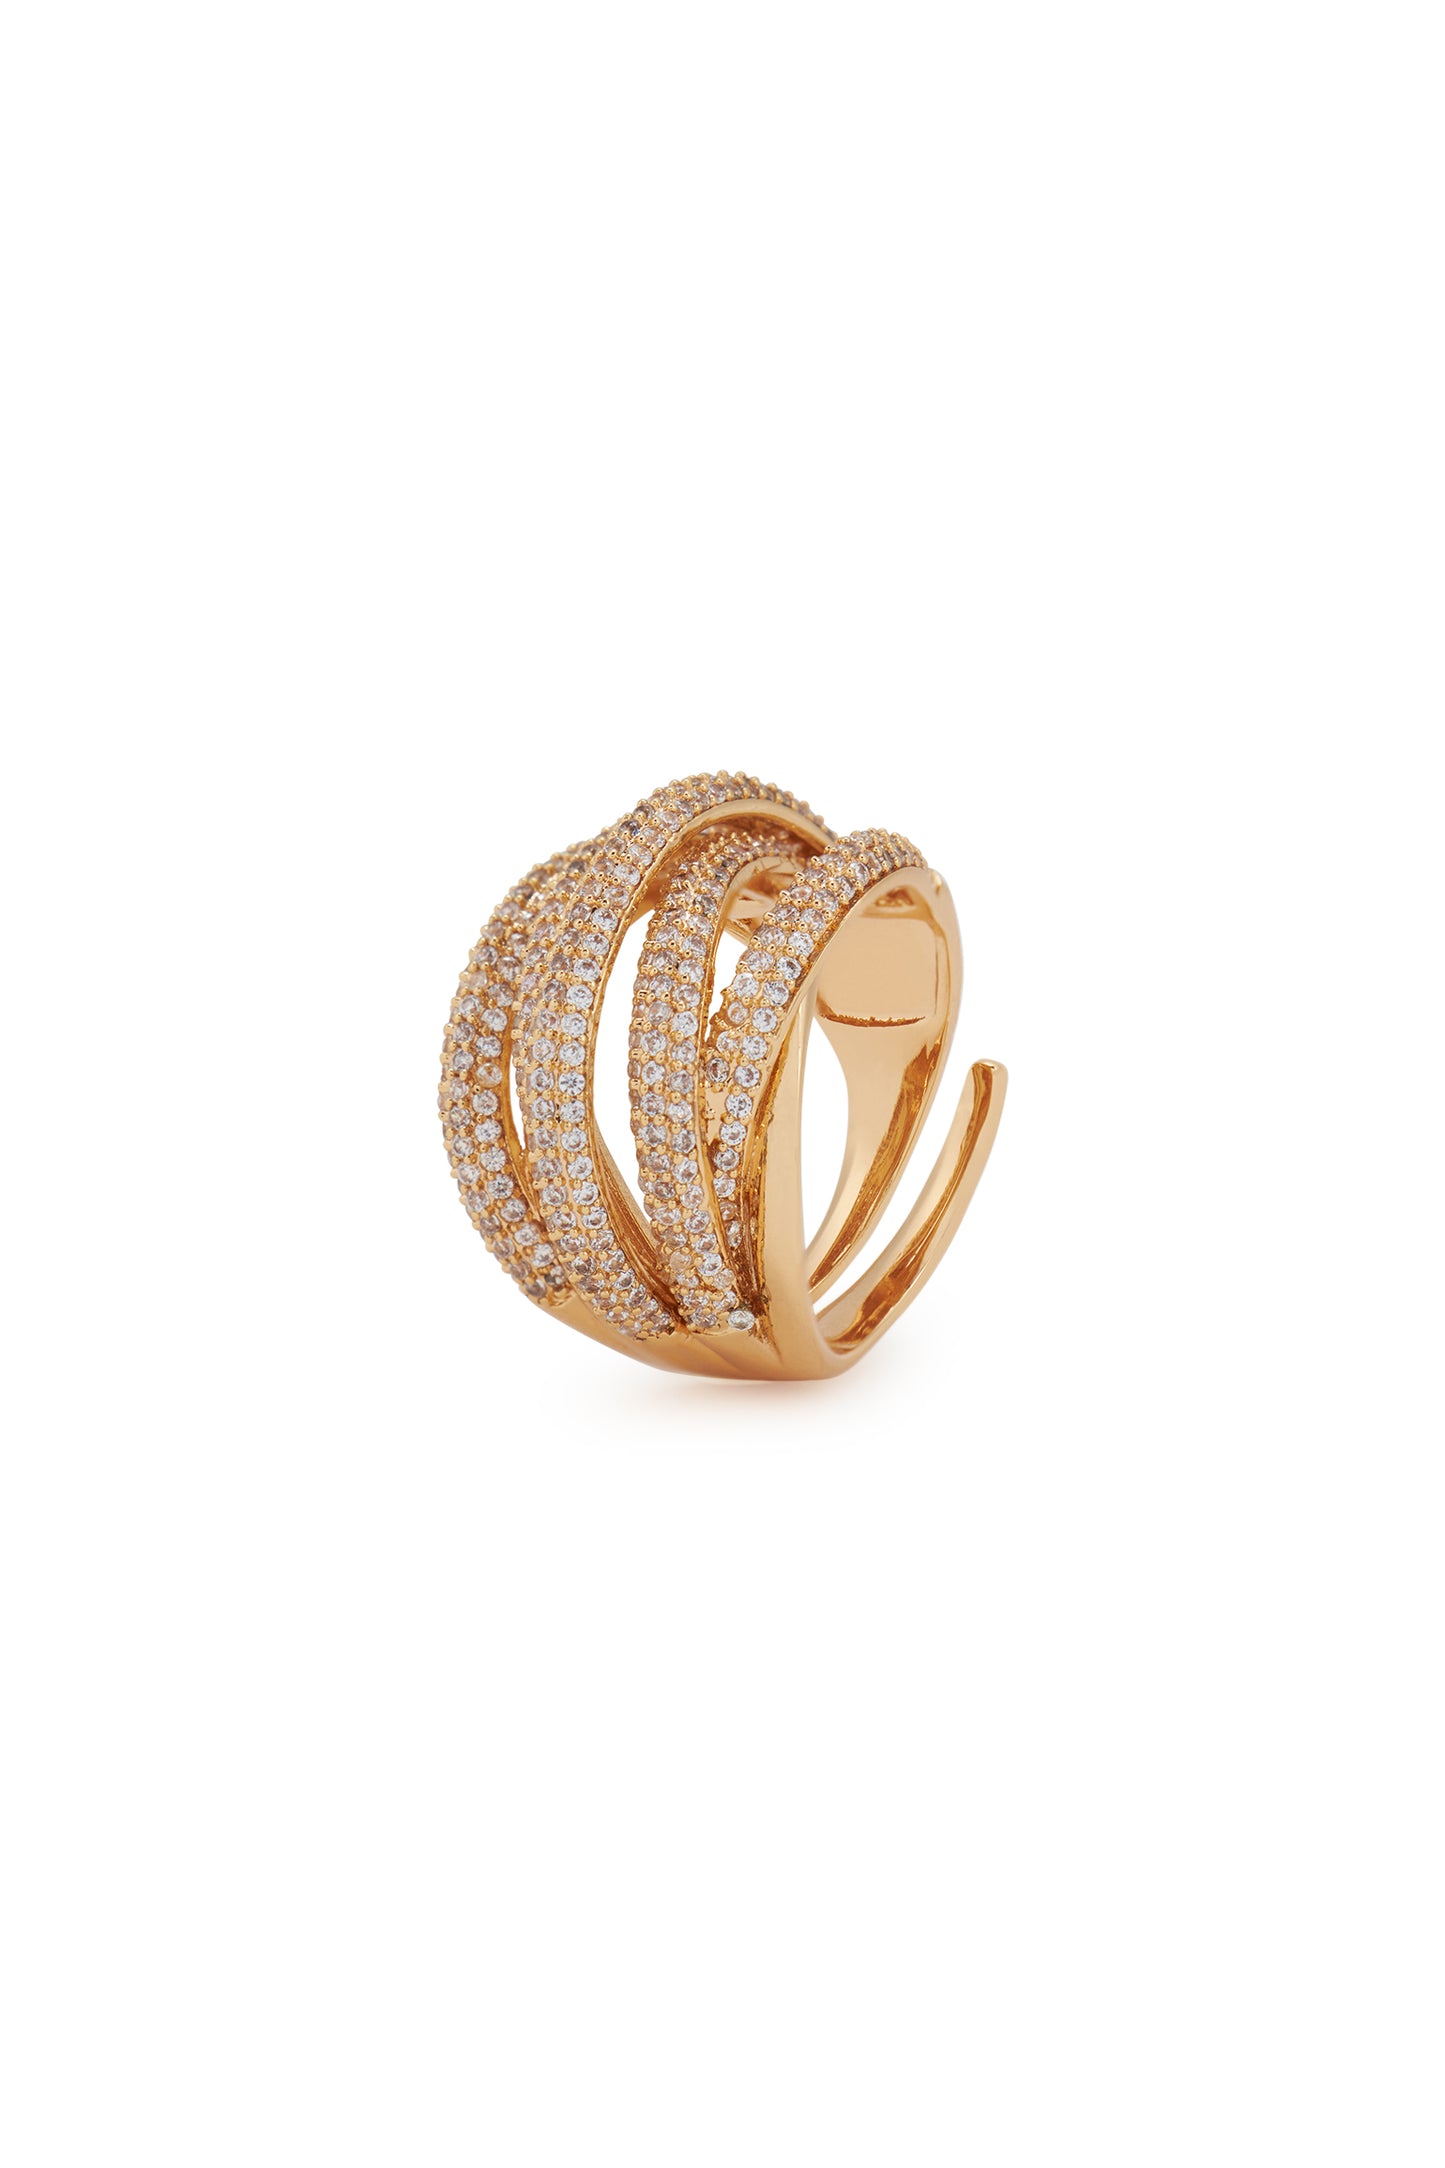 MELUSINA BIJOUX Small Gold Braided Wire Ring